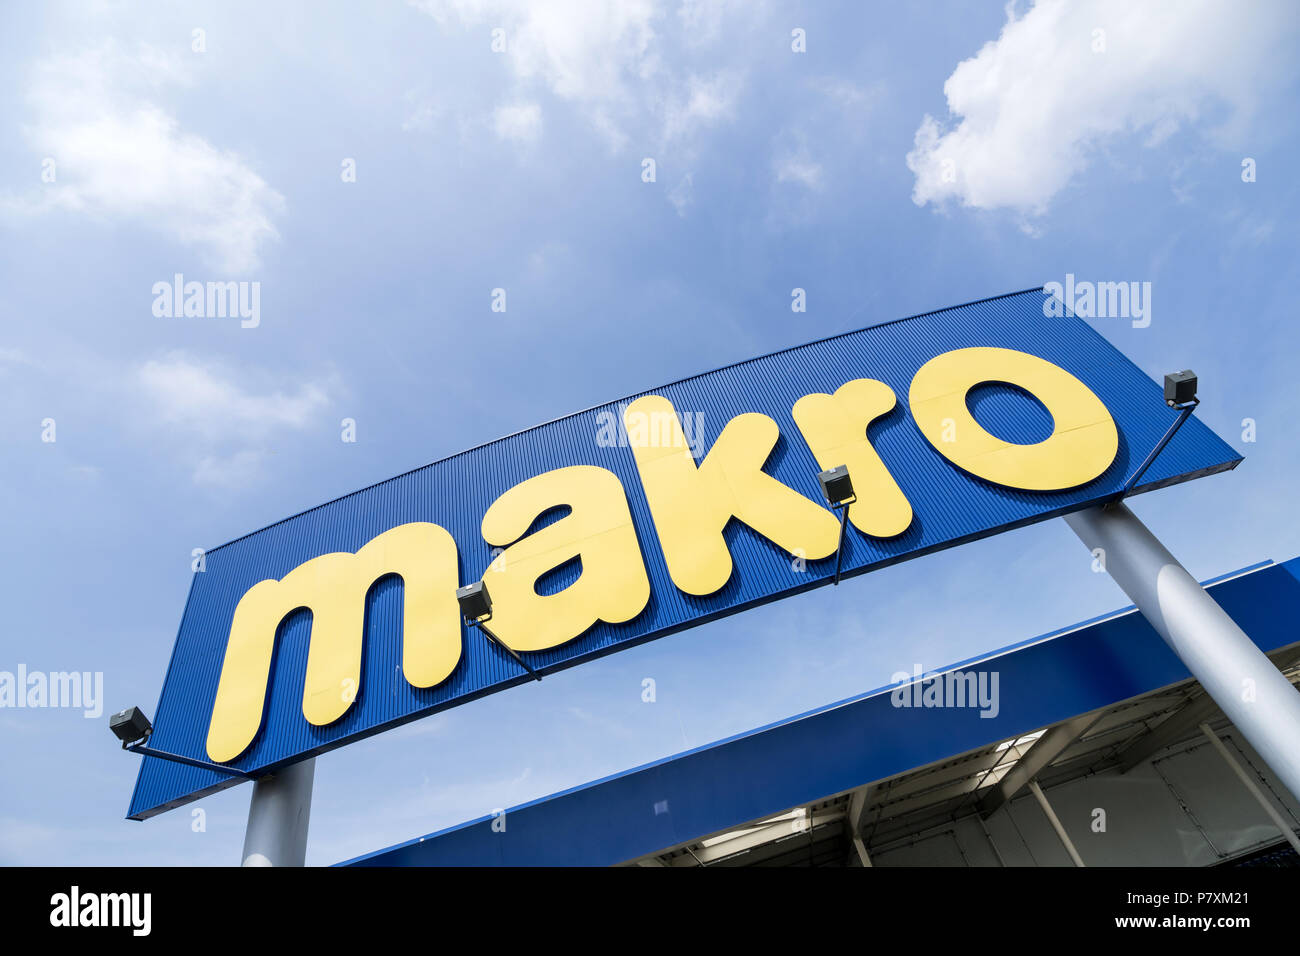 Makro sign at branch. Makro is an international brand of Warehouse clubs, also called cash and carries. Stock Photo